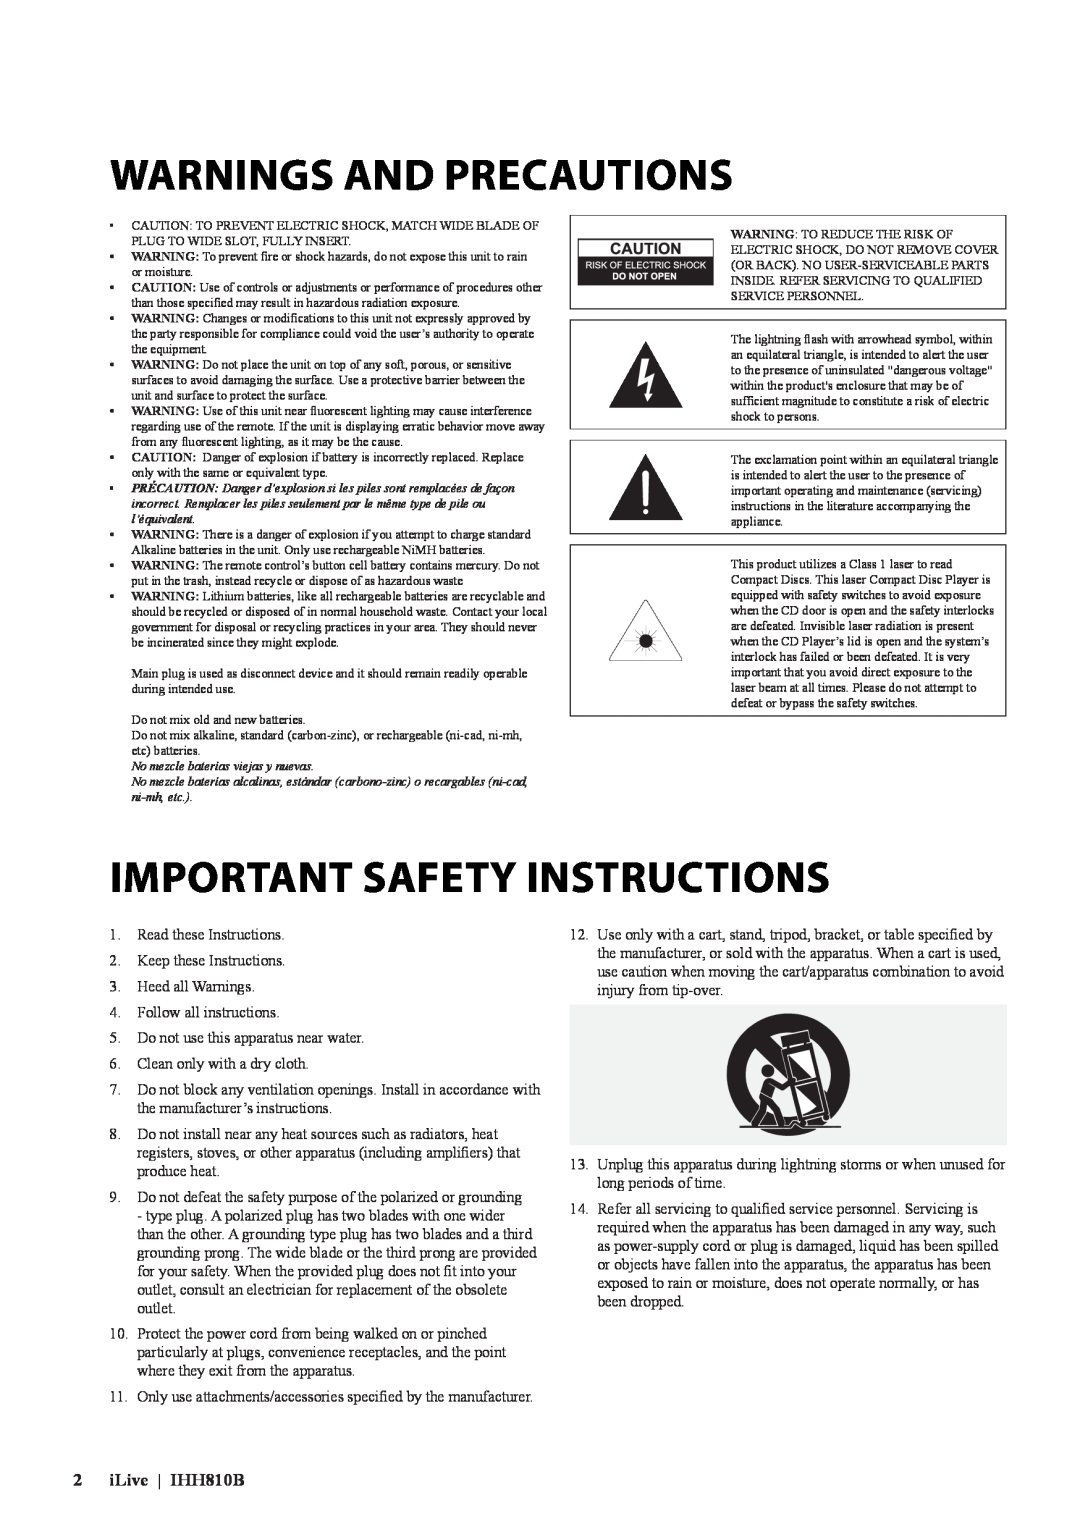 GPX manual Warnings And Precautions, Important Safety Instructions, iLive IHH810B 